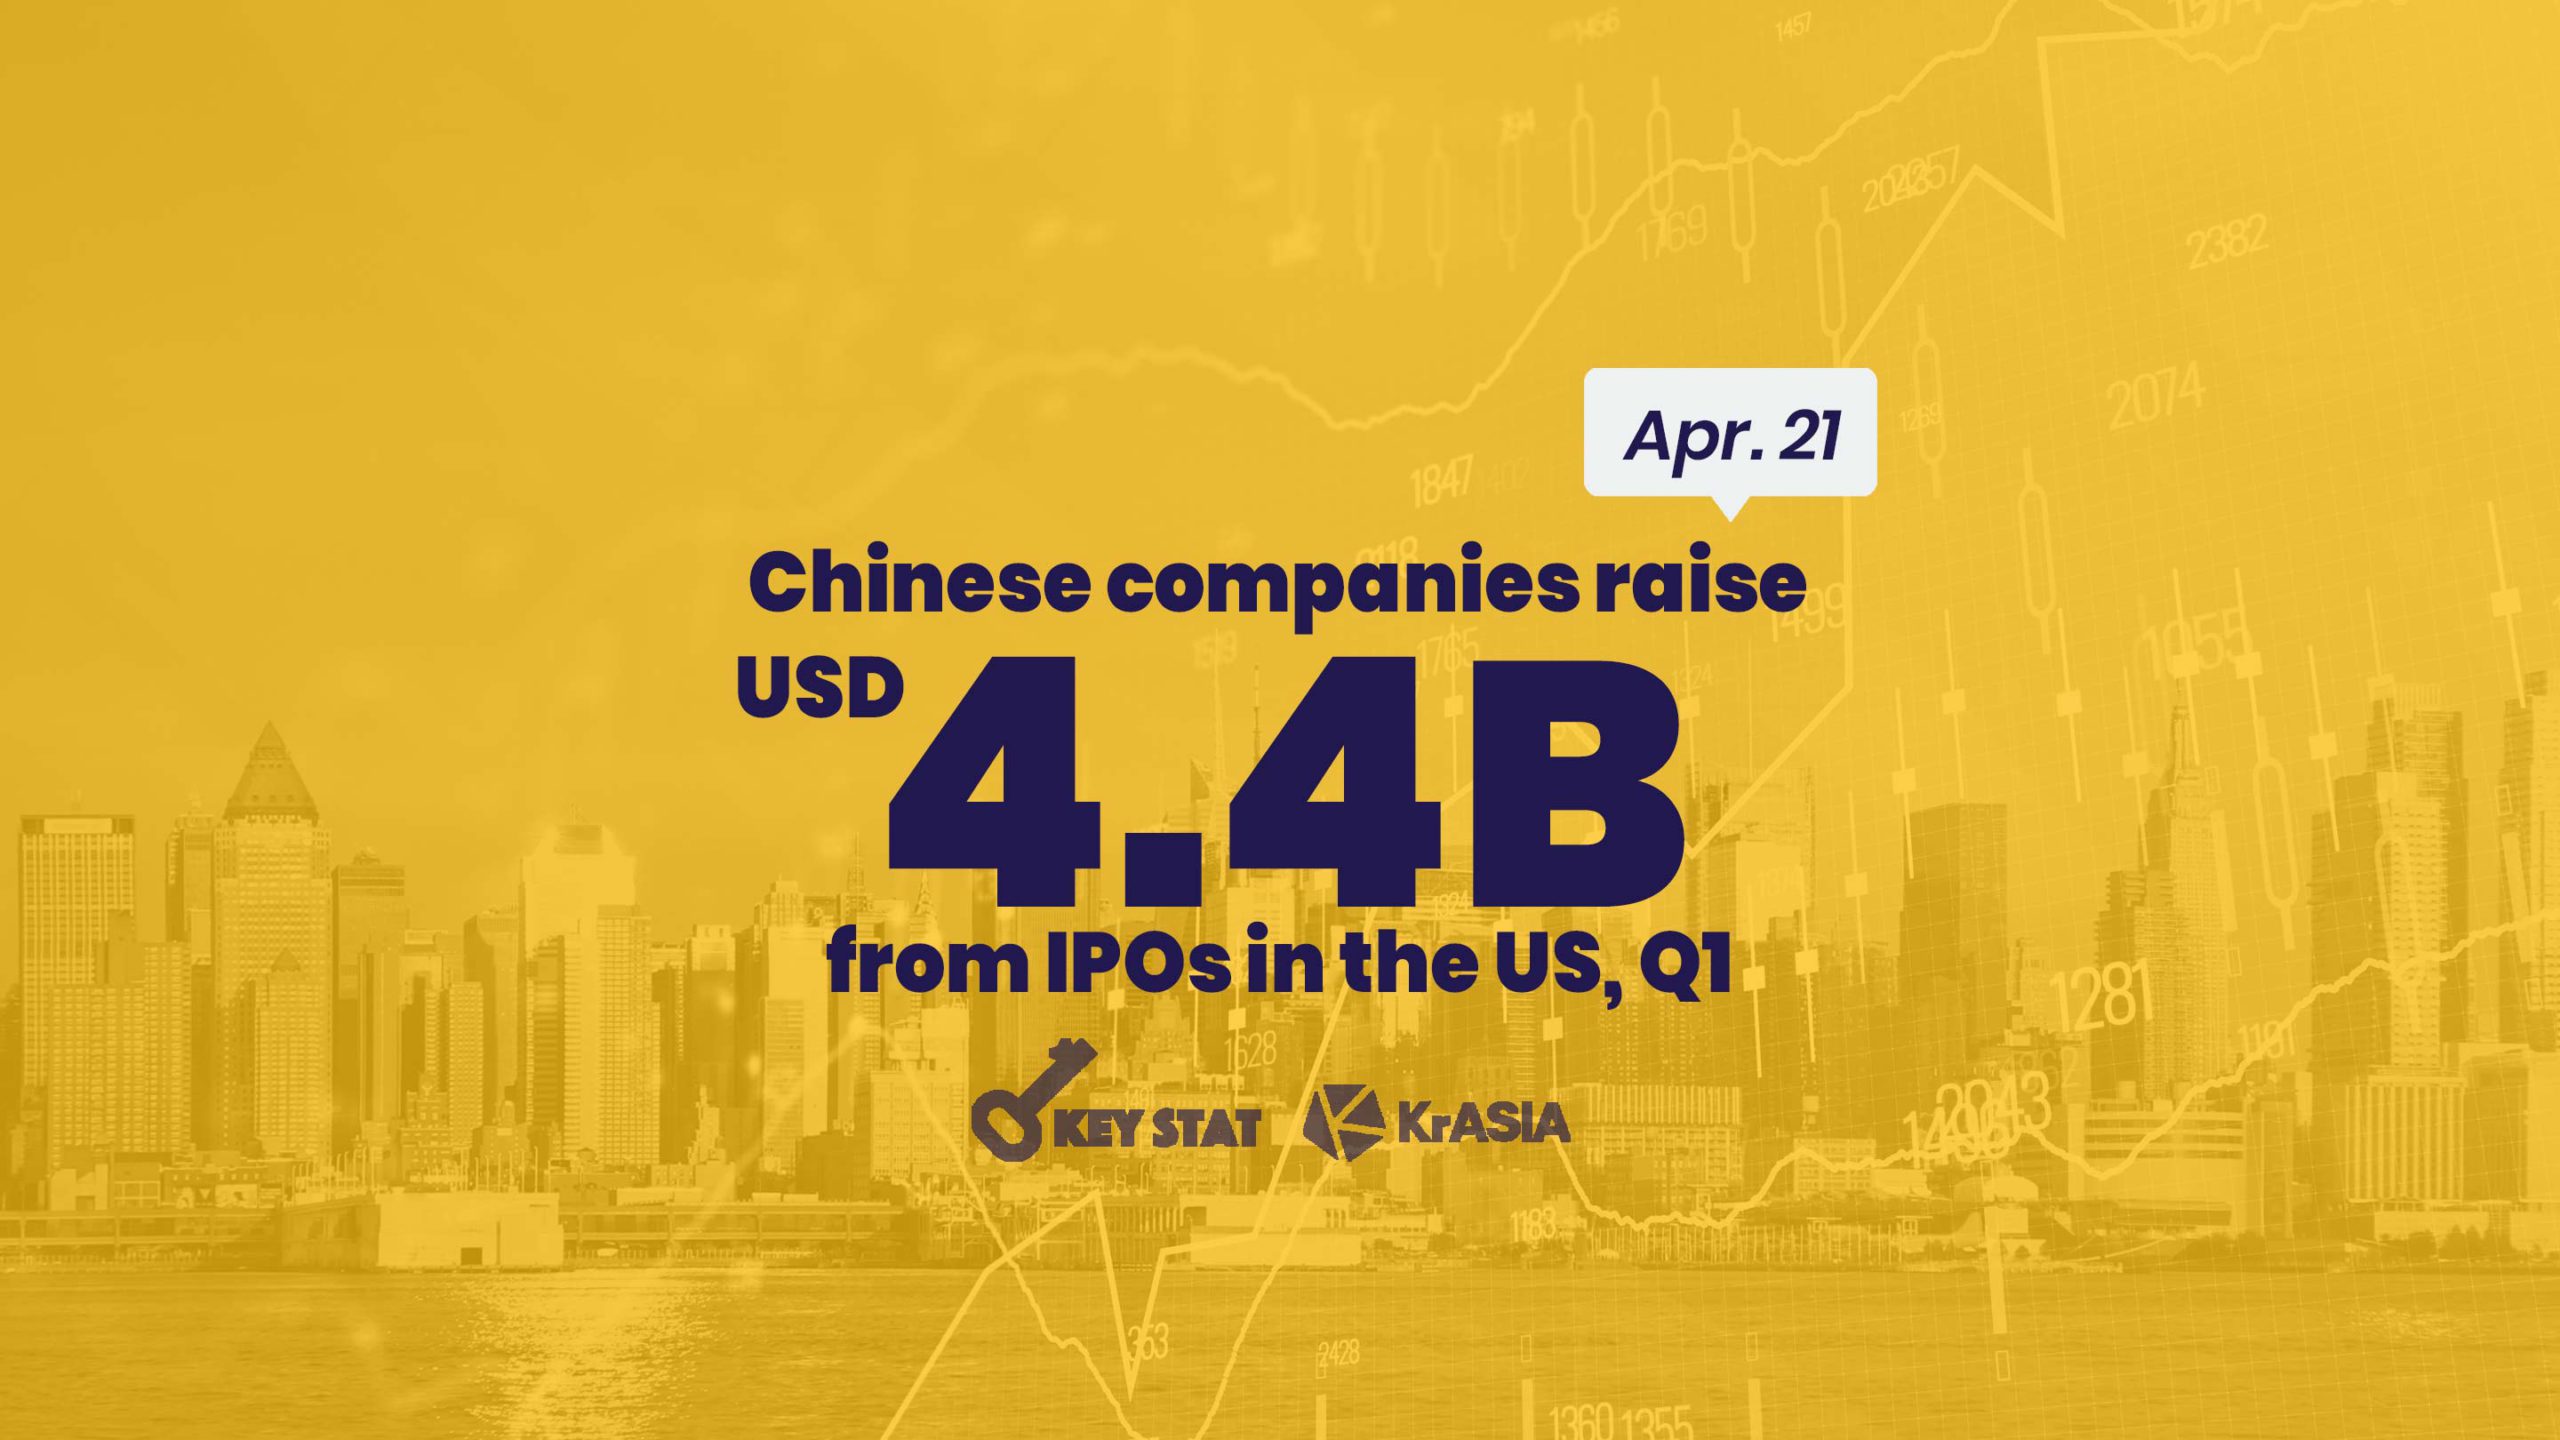 KEY STAT | Chinese firms raise nearly 12x more money year-on-year in US markets